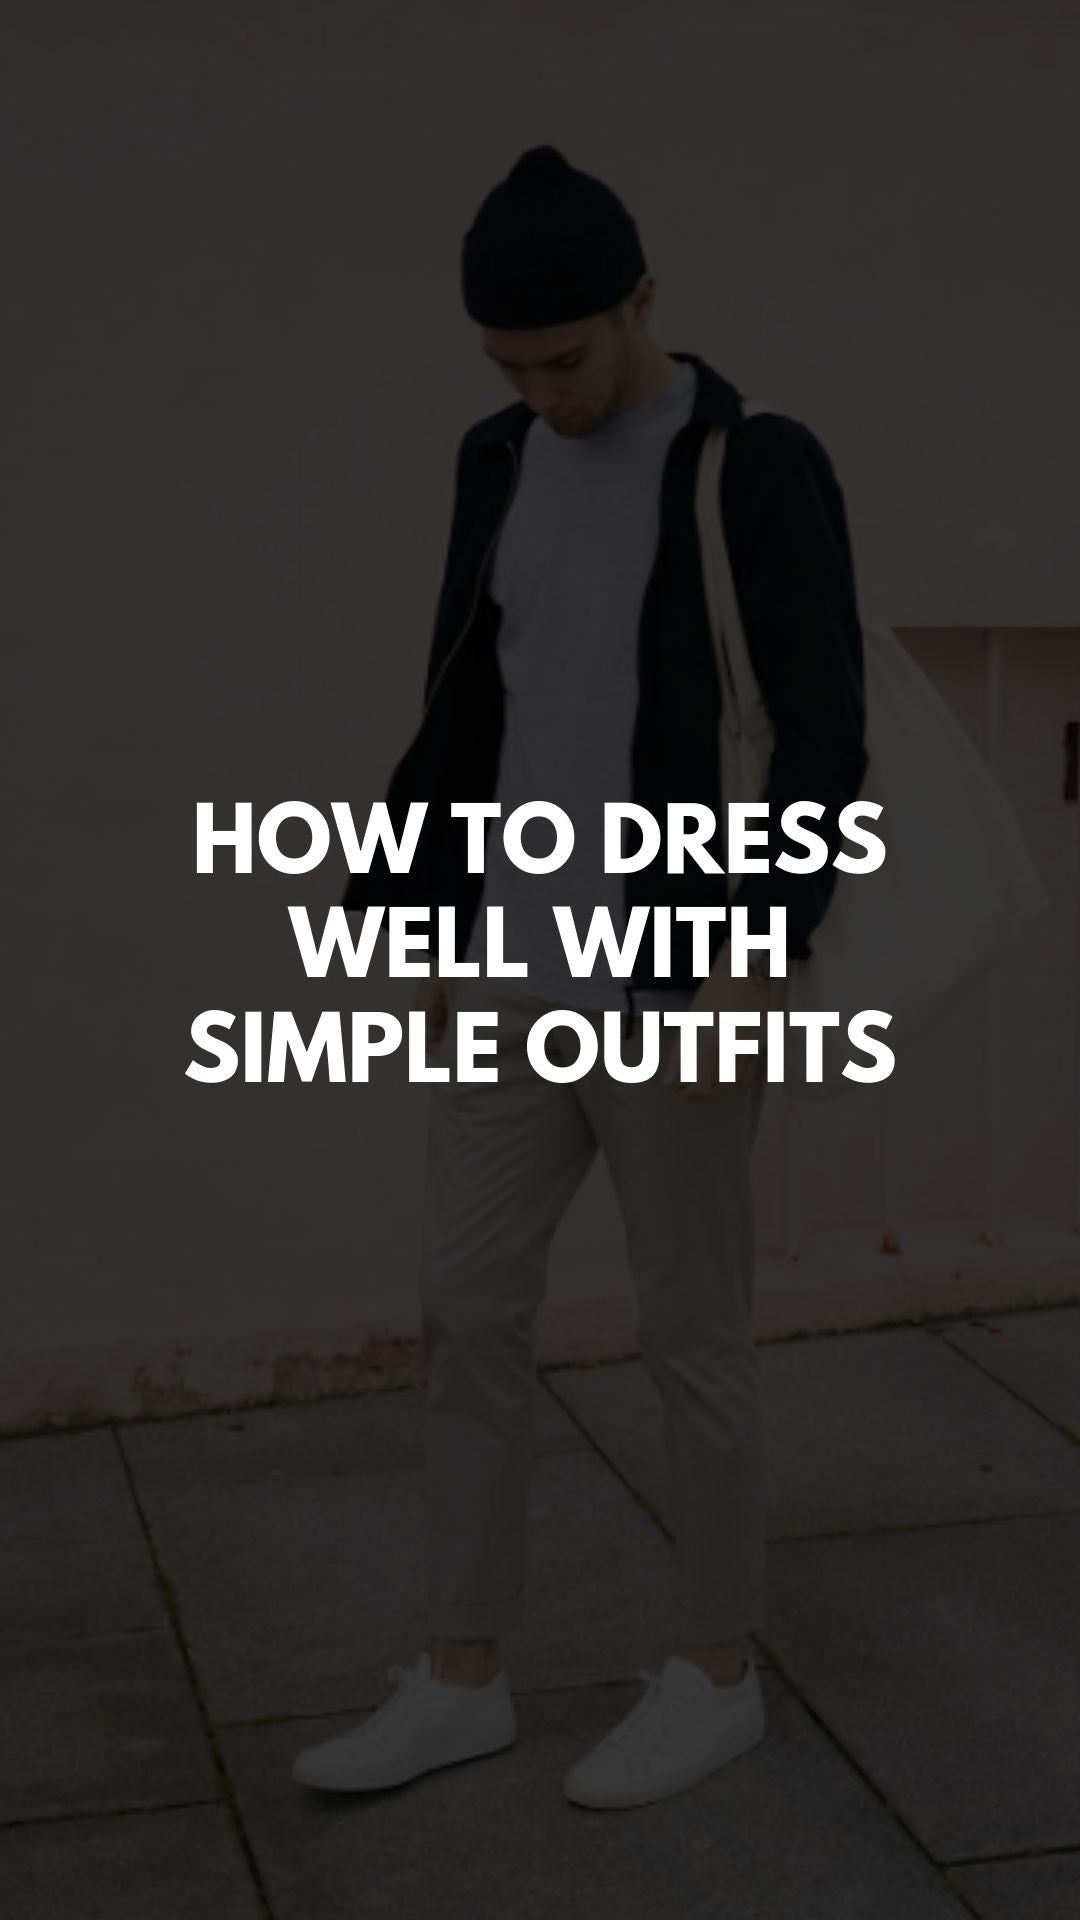 Simple outfit ideas for men #mensfashion #simplestyle #simpleoutfits